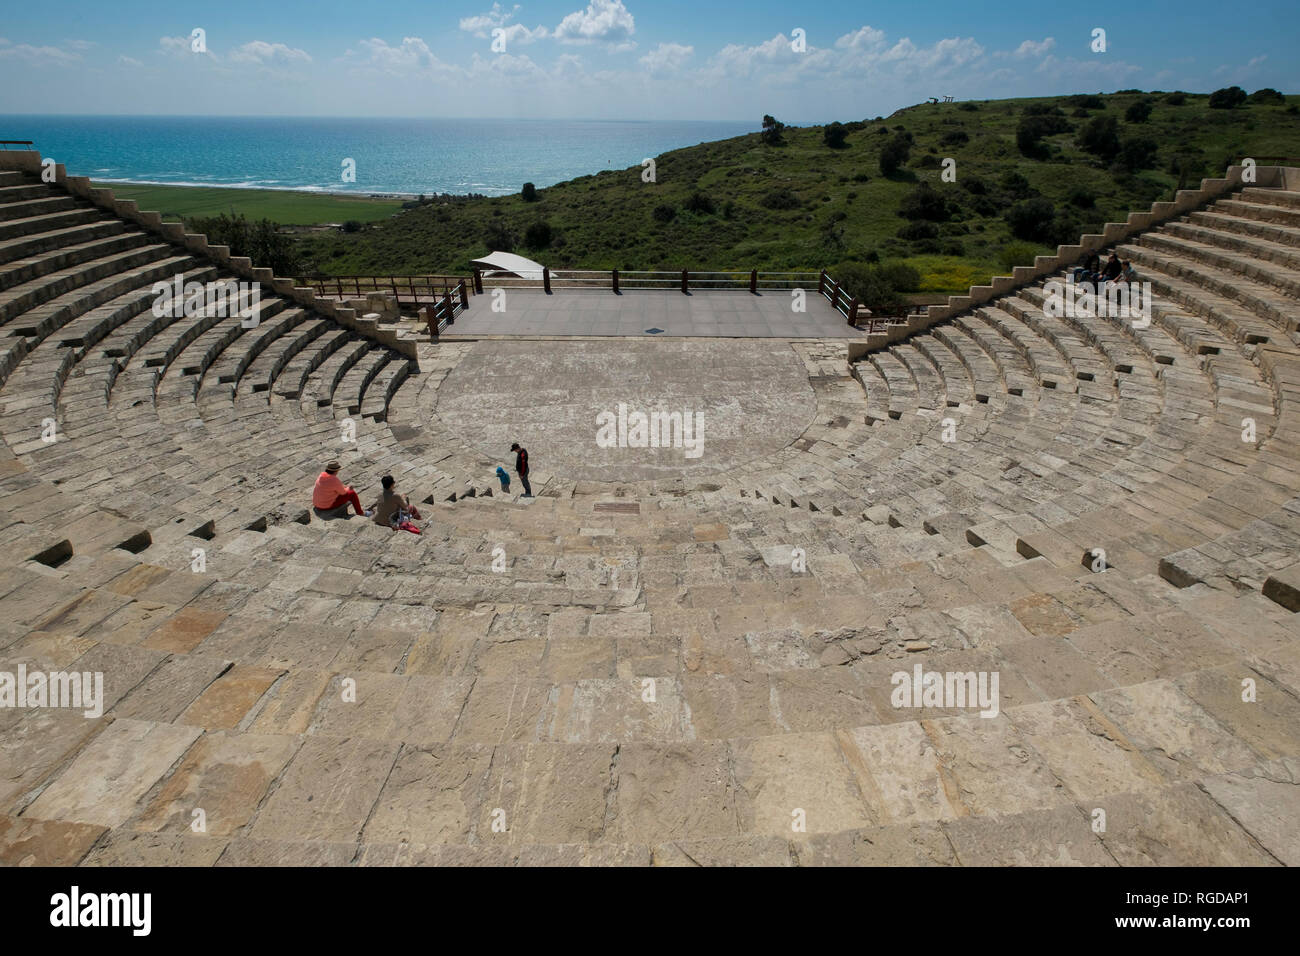 A large ampitheater overlooks the sea at the ancient Roman ruin at Kourion, Cyprus. Stock Photo